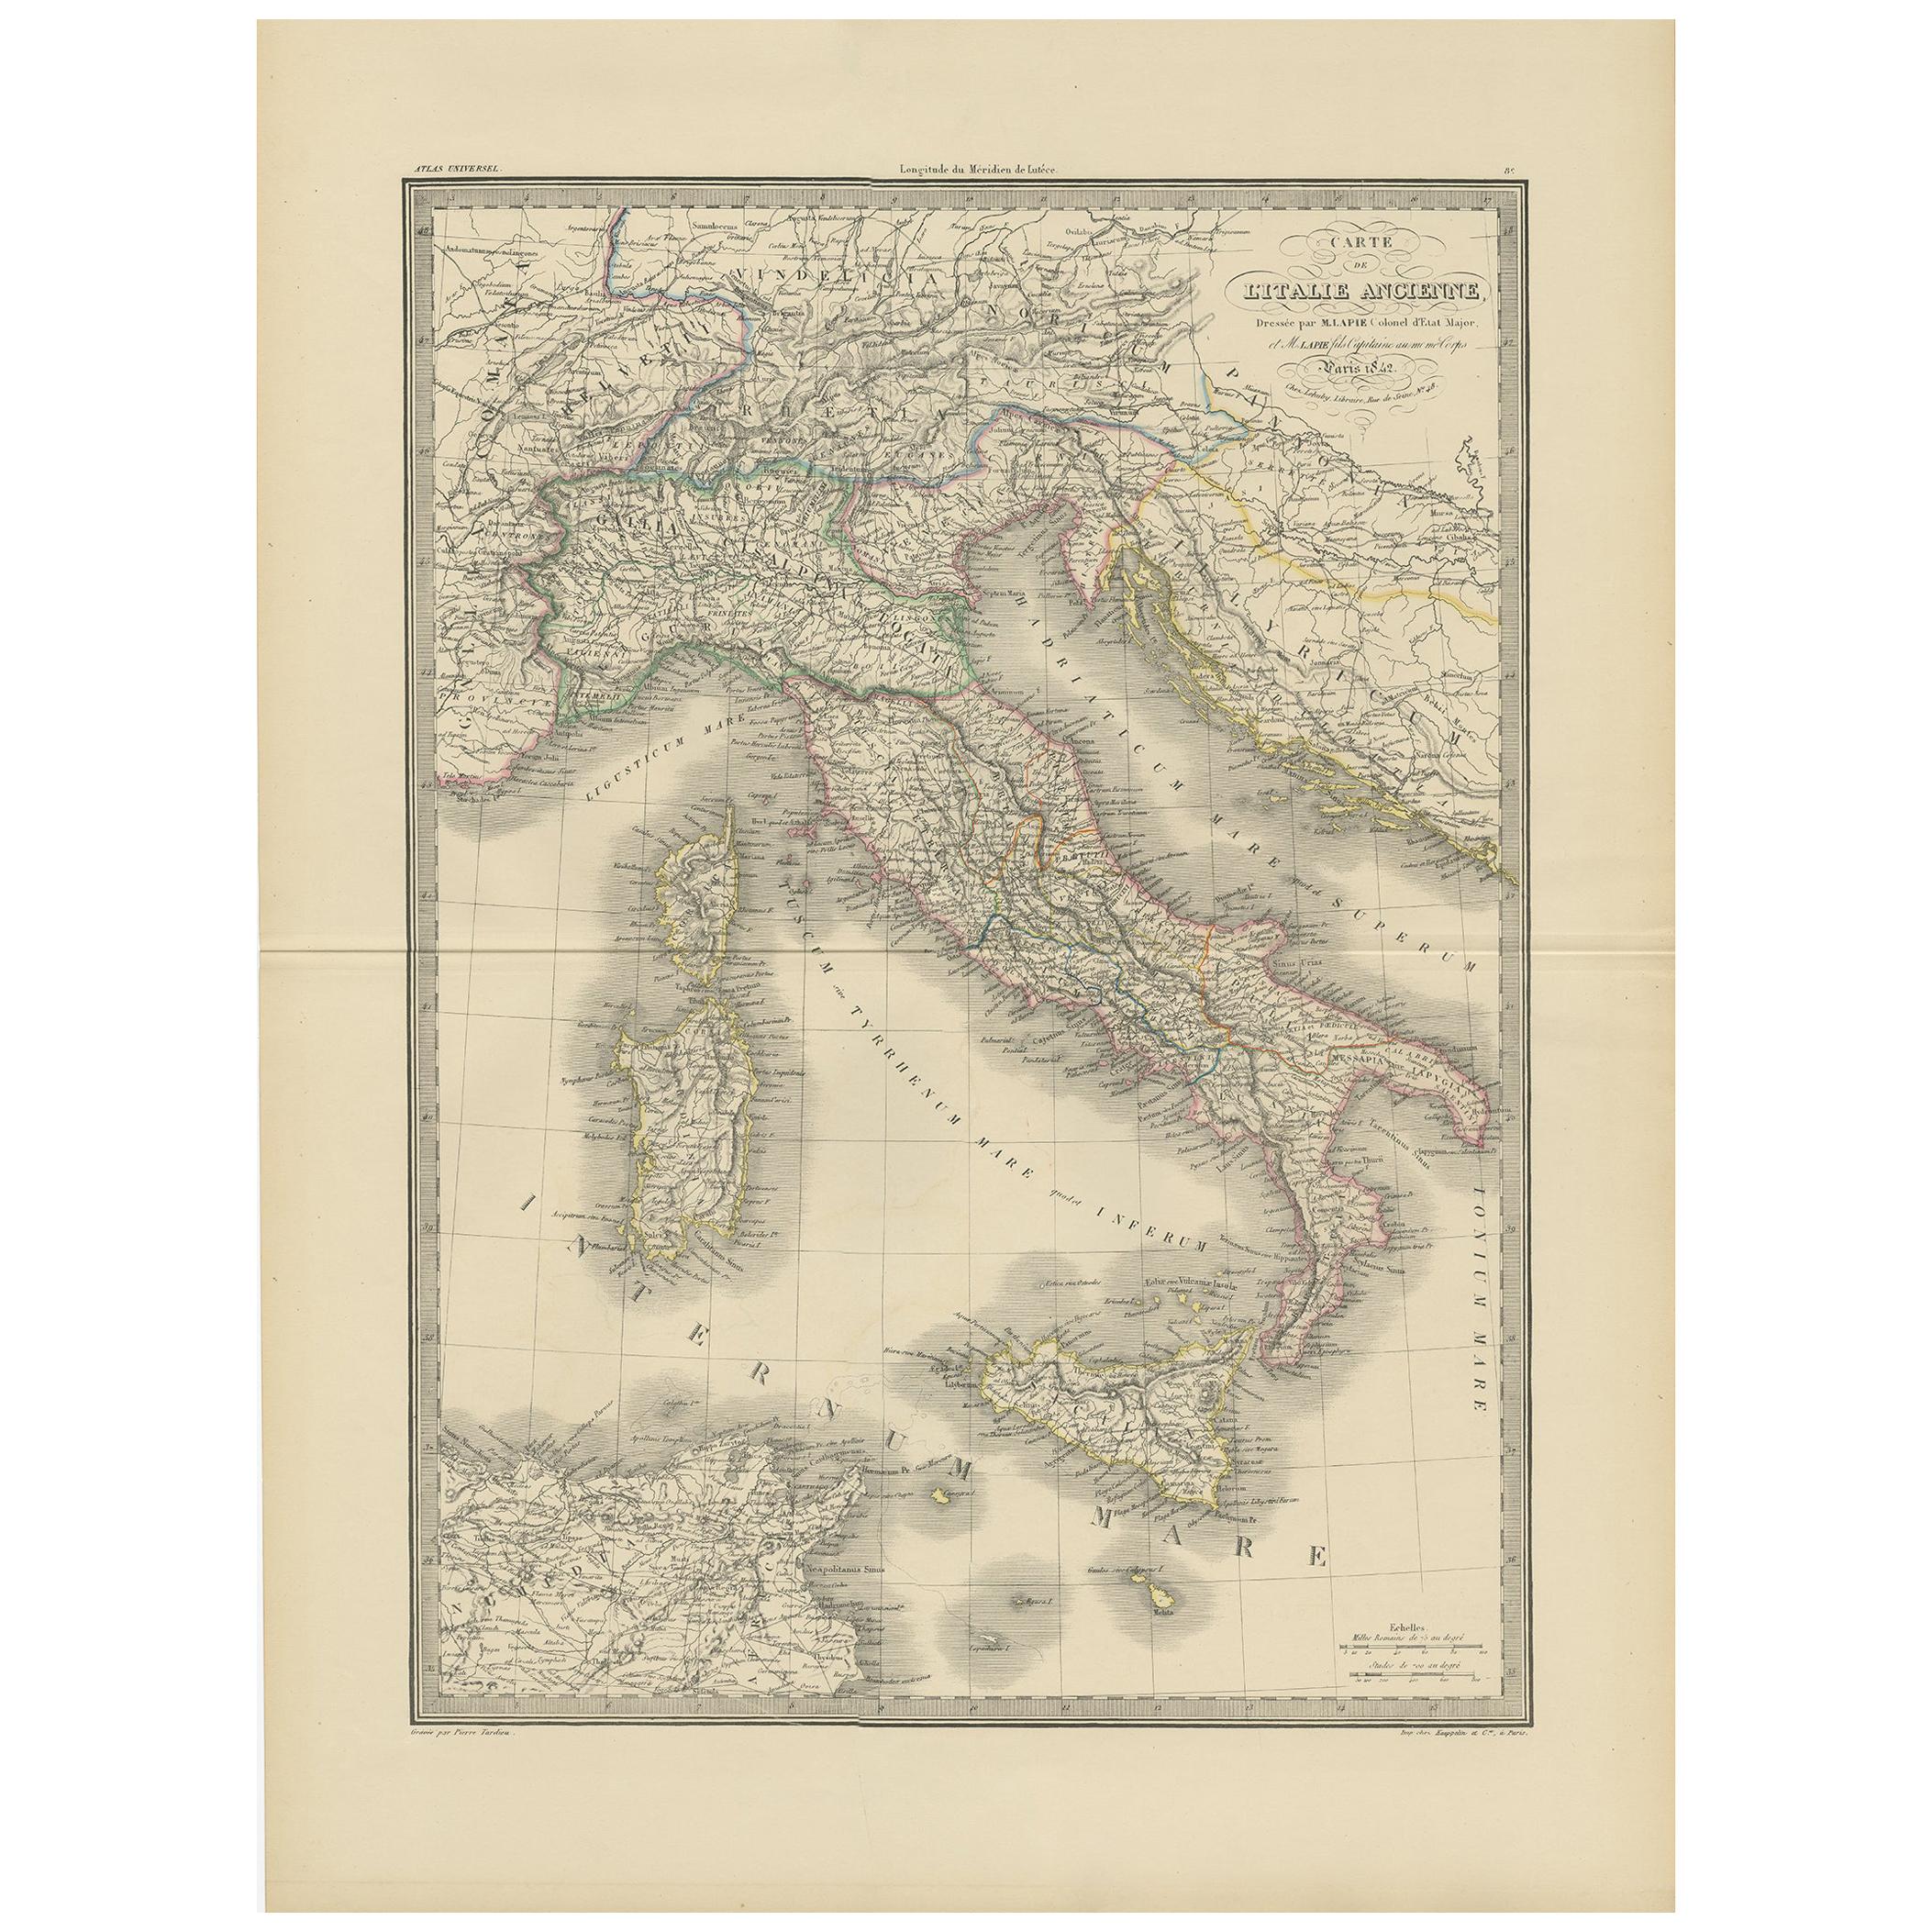 Antique Map of Italy by Lapie, 1842